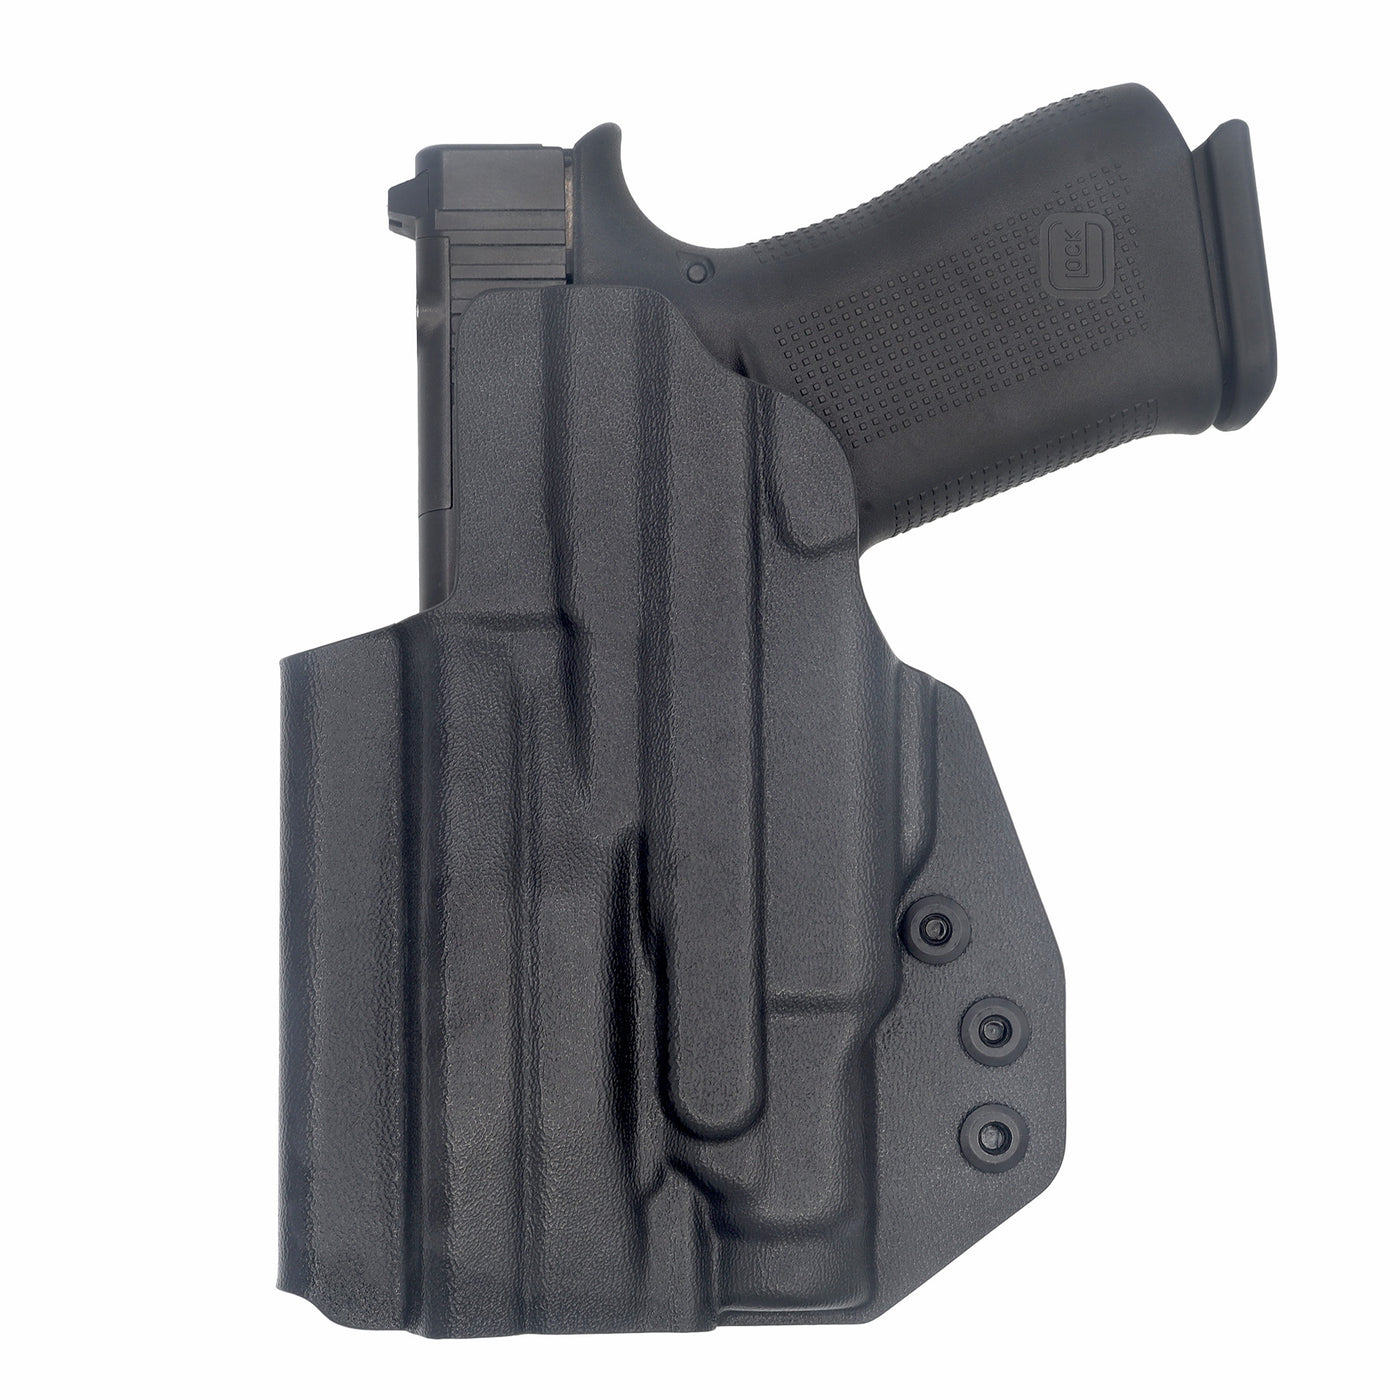 C&G Holsters custom IWB Tactical Glock 43x/48 Streamlight TLR-7 sub in holstered position back view